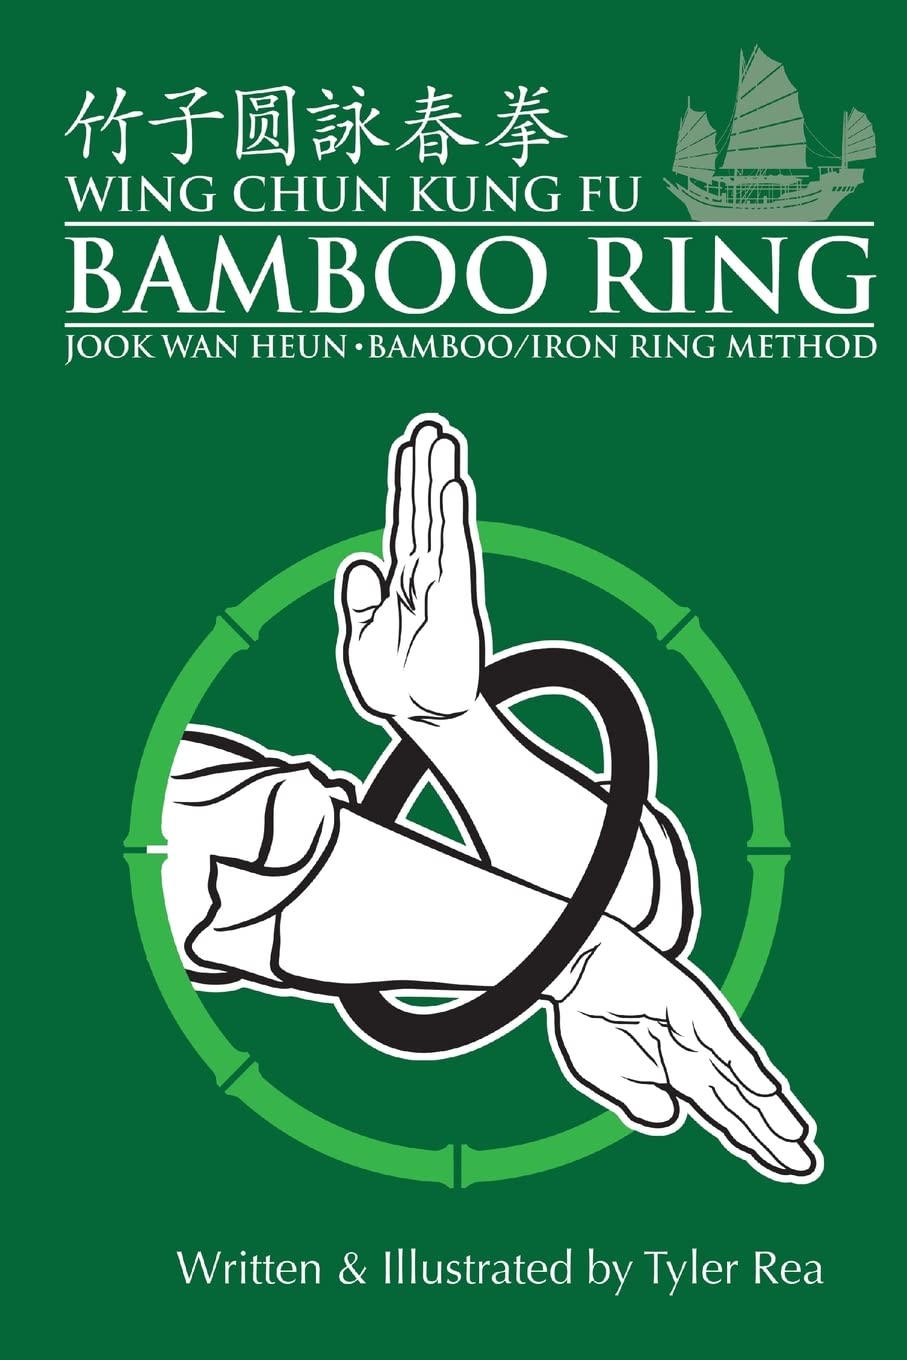 Wing Chun Kung Fu Bamboo Ring: Martial Methods and Details of the Jook Wan Heun of Wing Chun Book by Tyler Rea